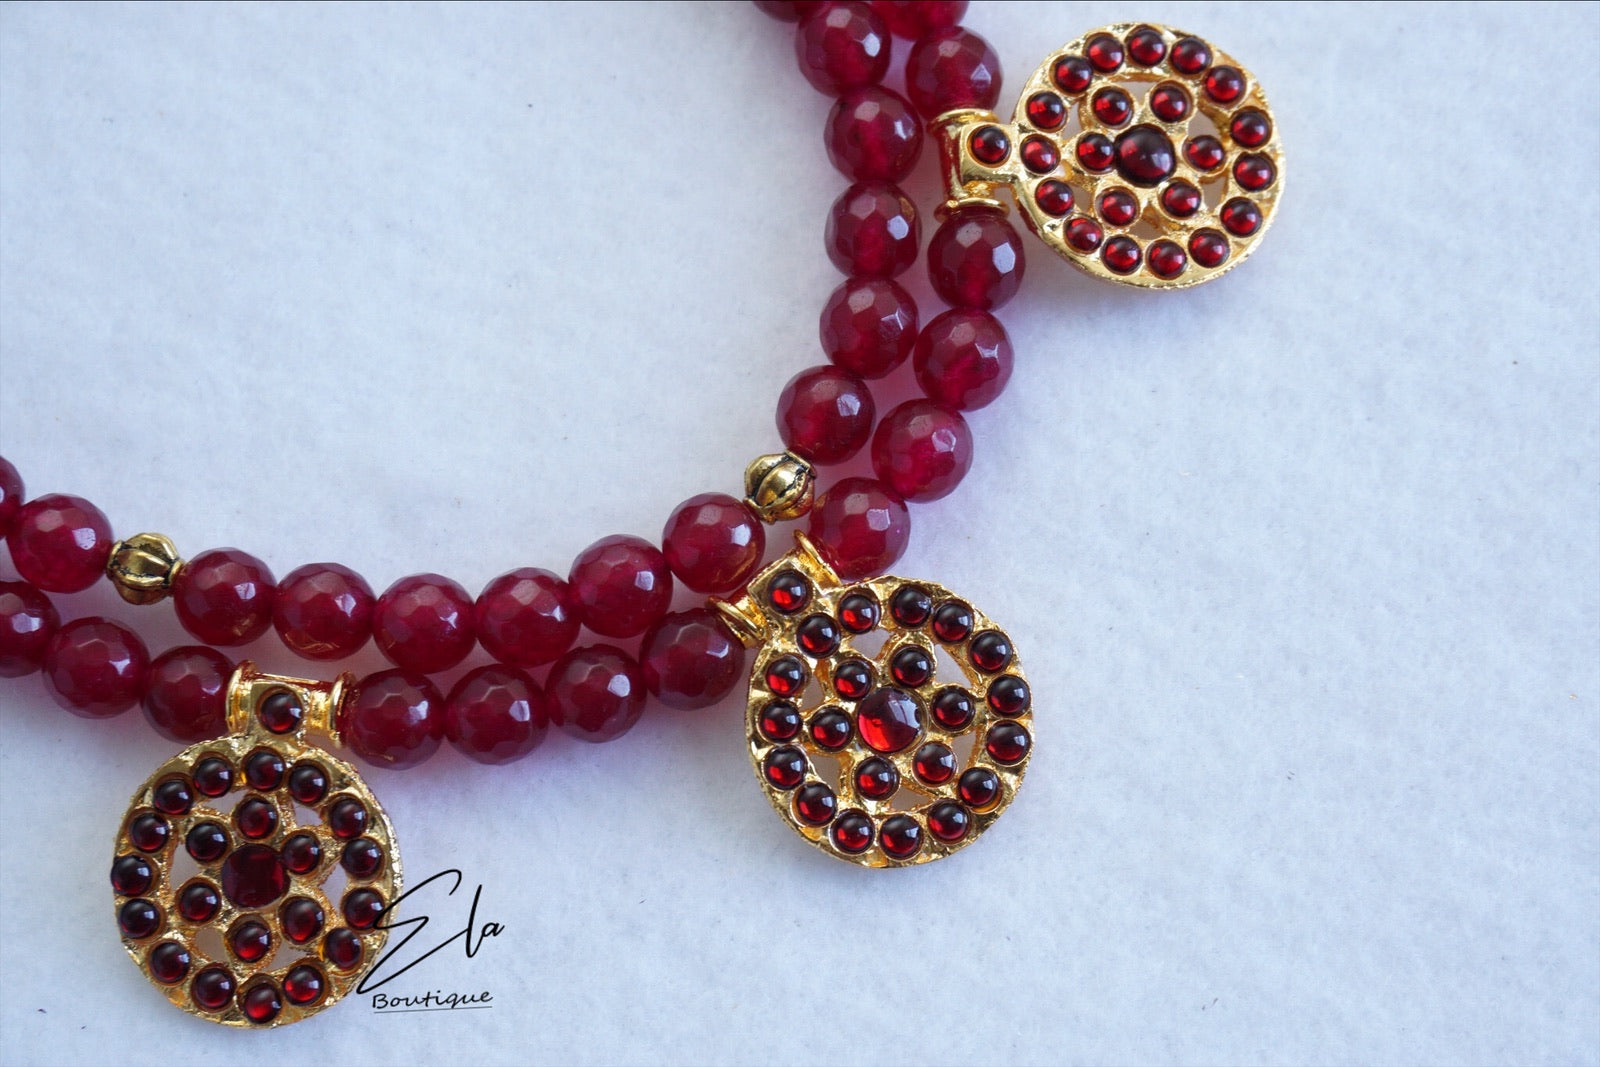 Traditional Kemp Neckwear with Red Beads.